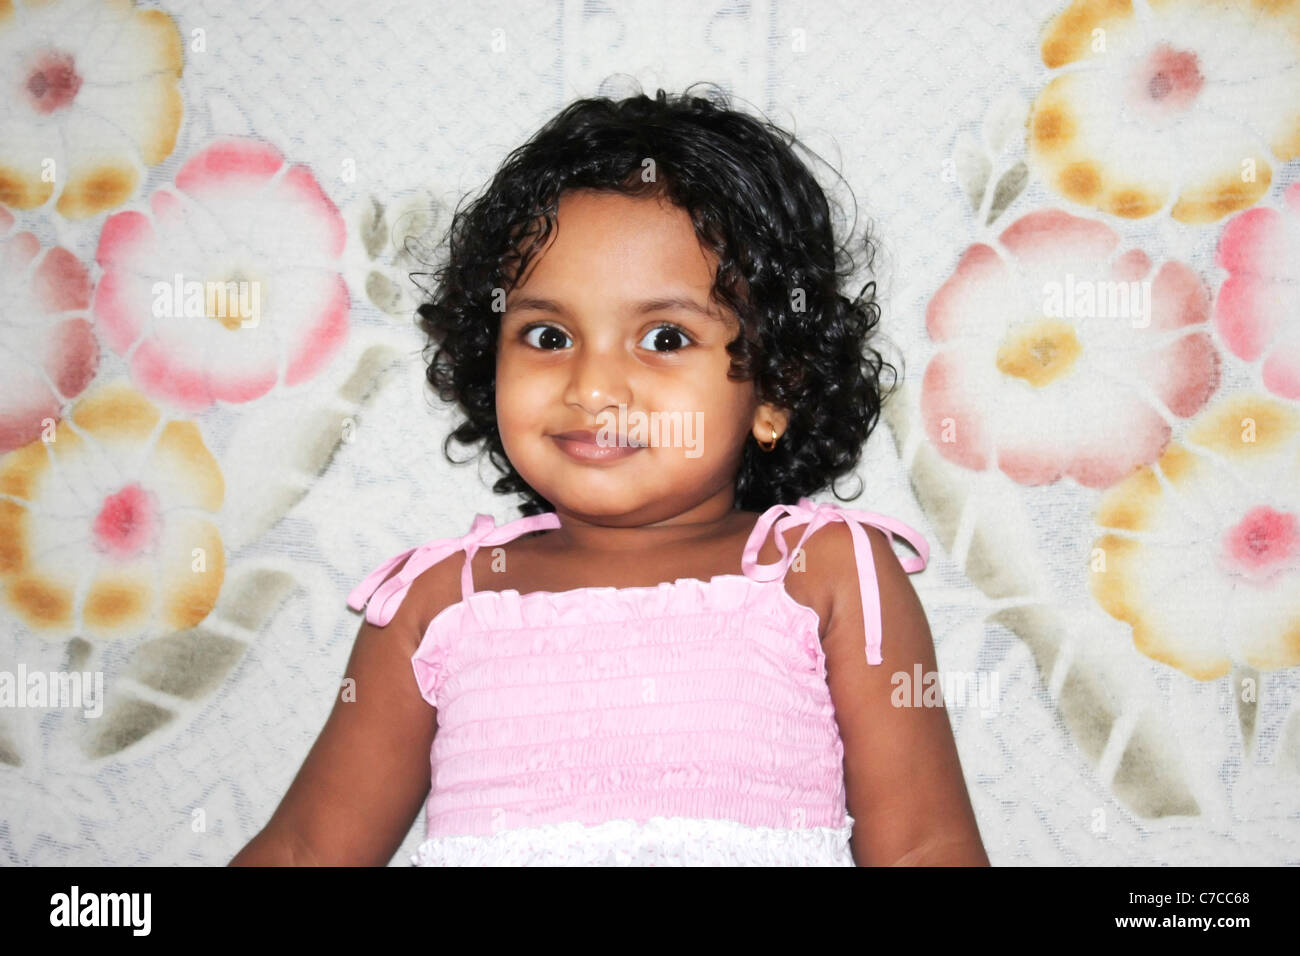 A cute girl child smiling Stock Photo